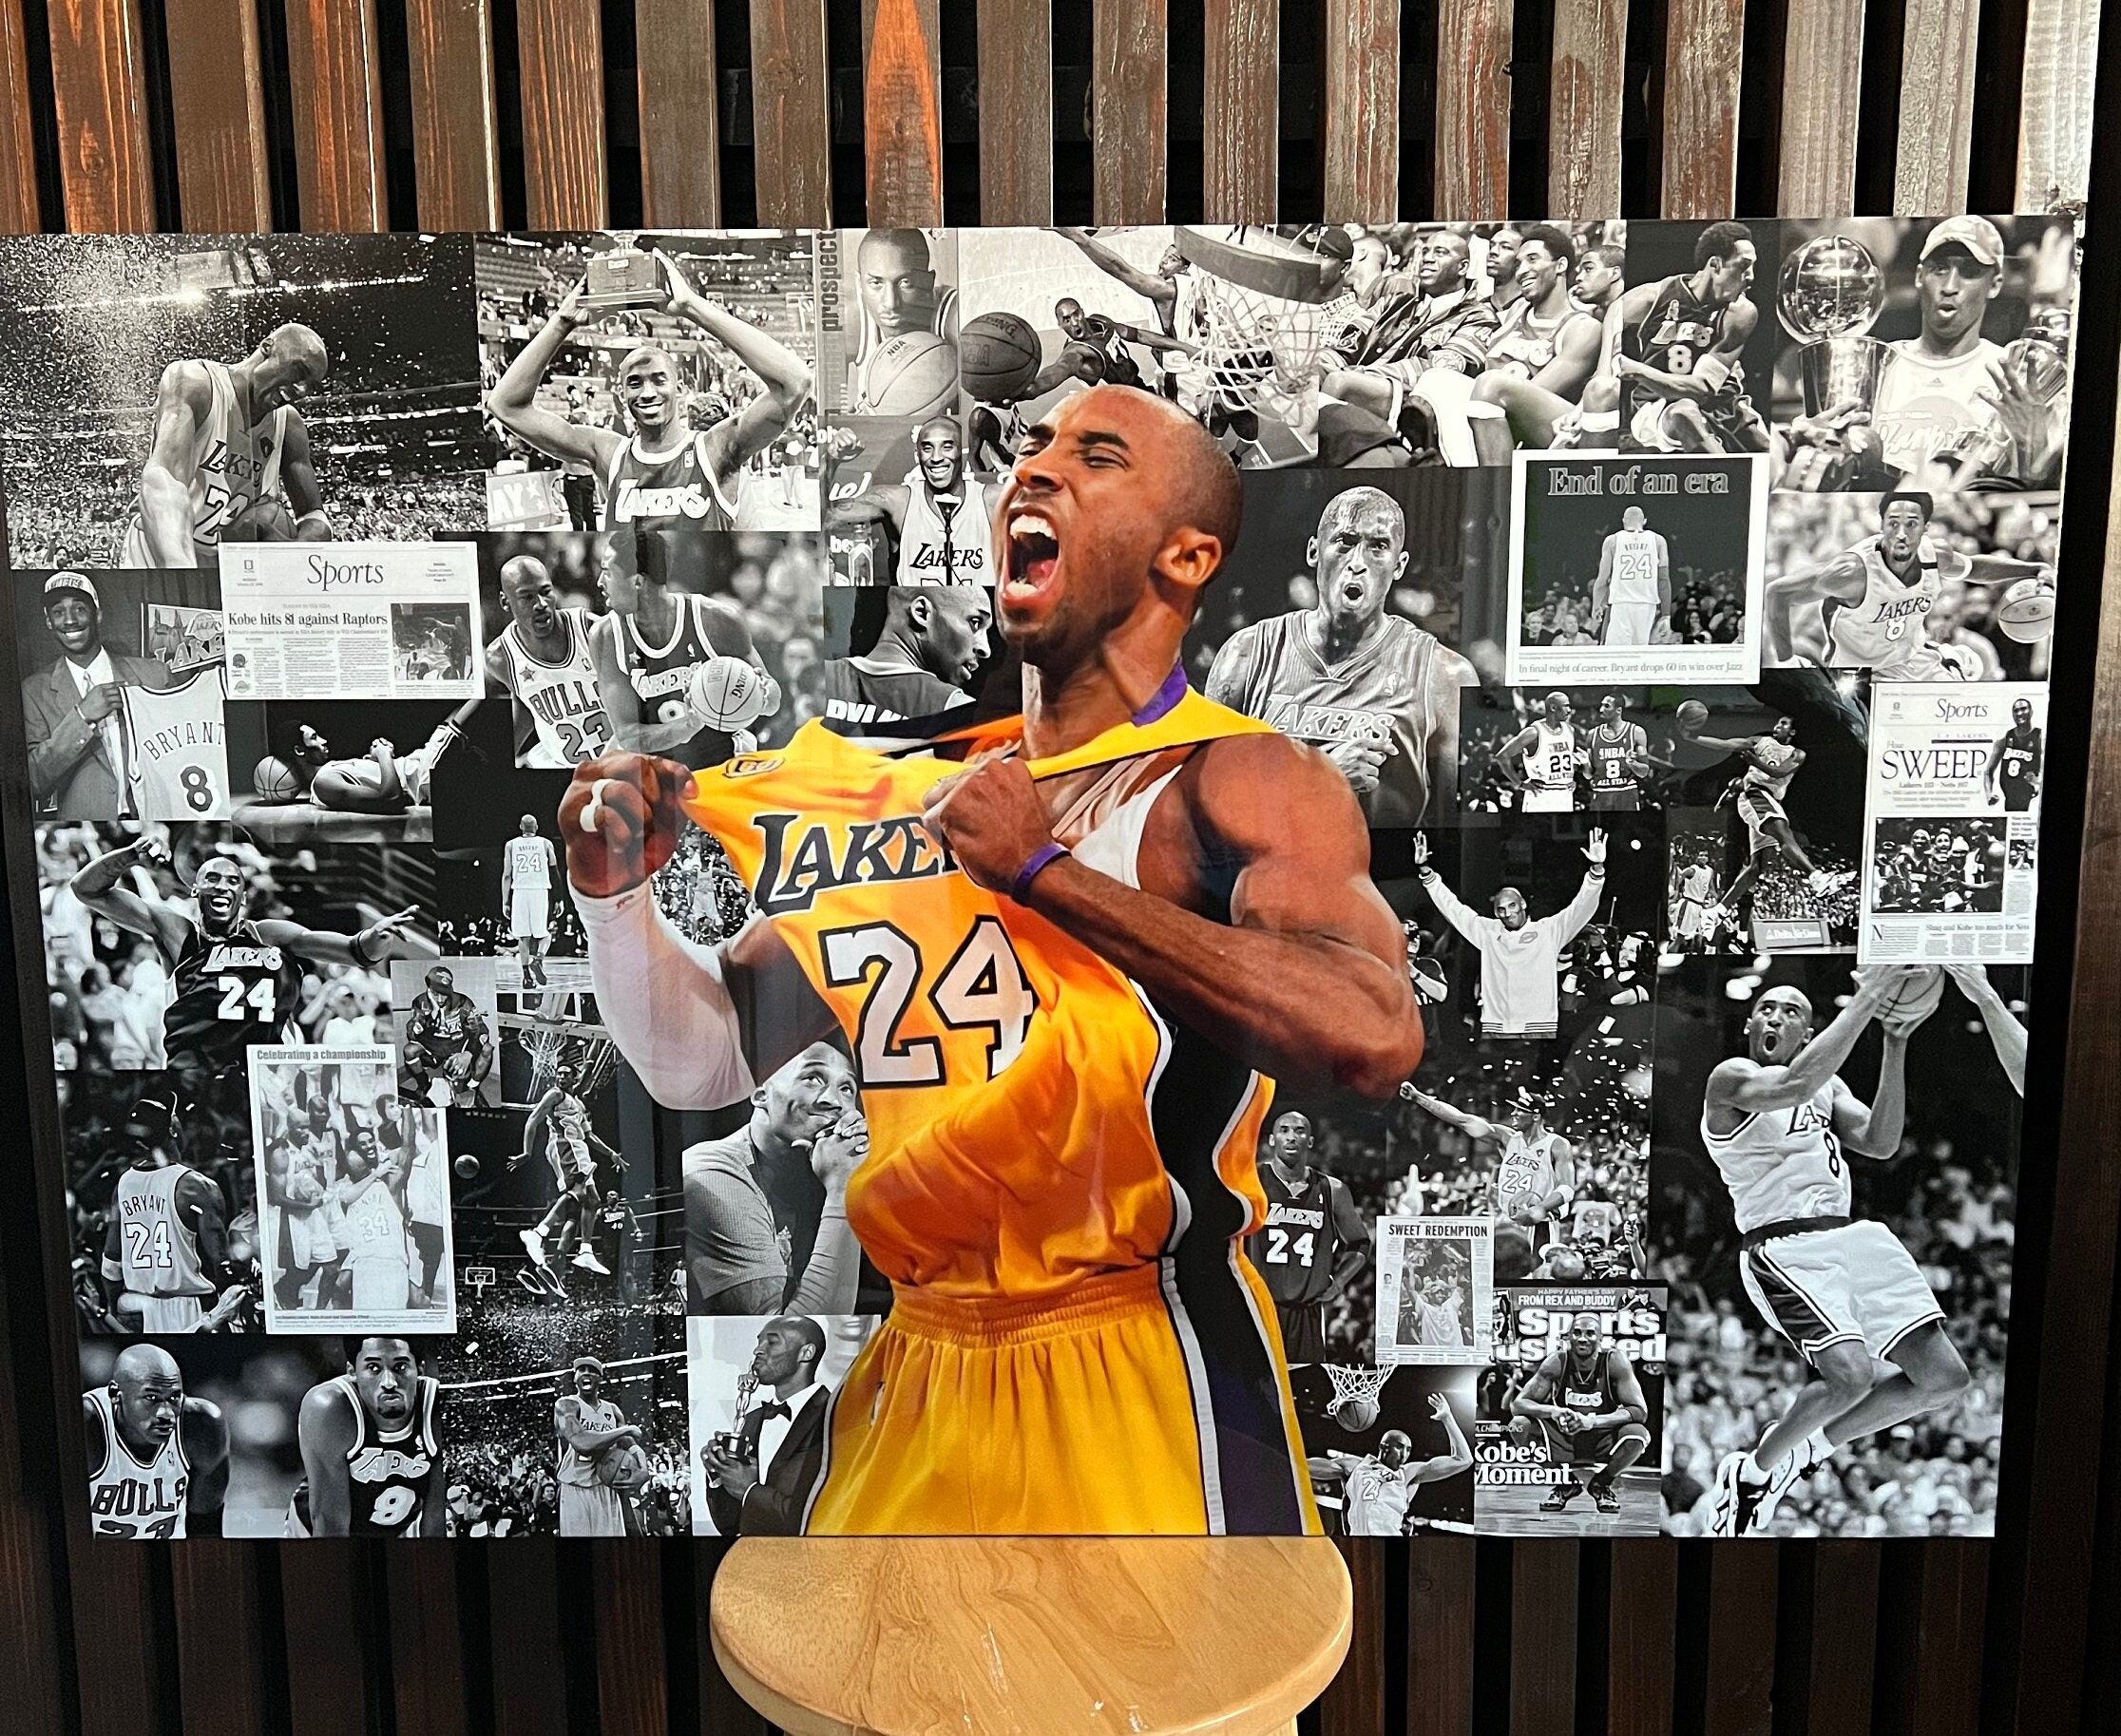 US ART & FRAME - Kobe Bryant Signature Moment Poster 24 x 36 LA Lakers,  Made in USA